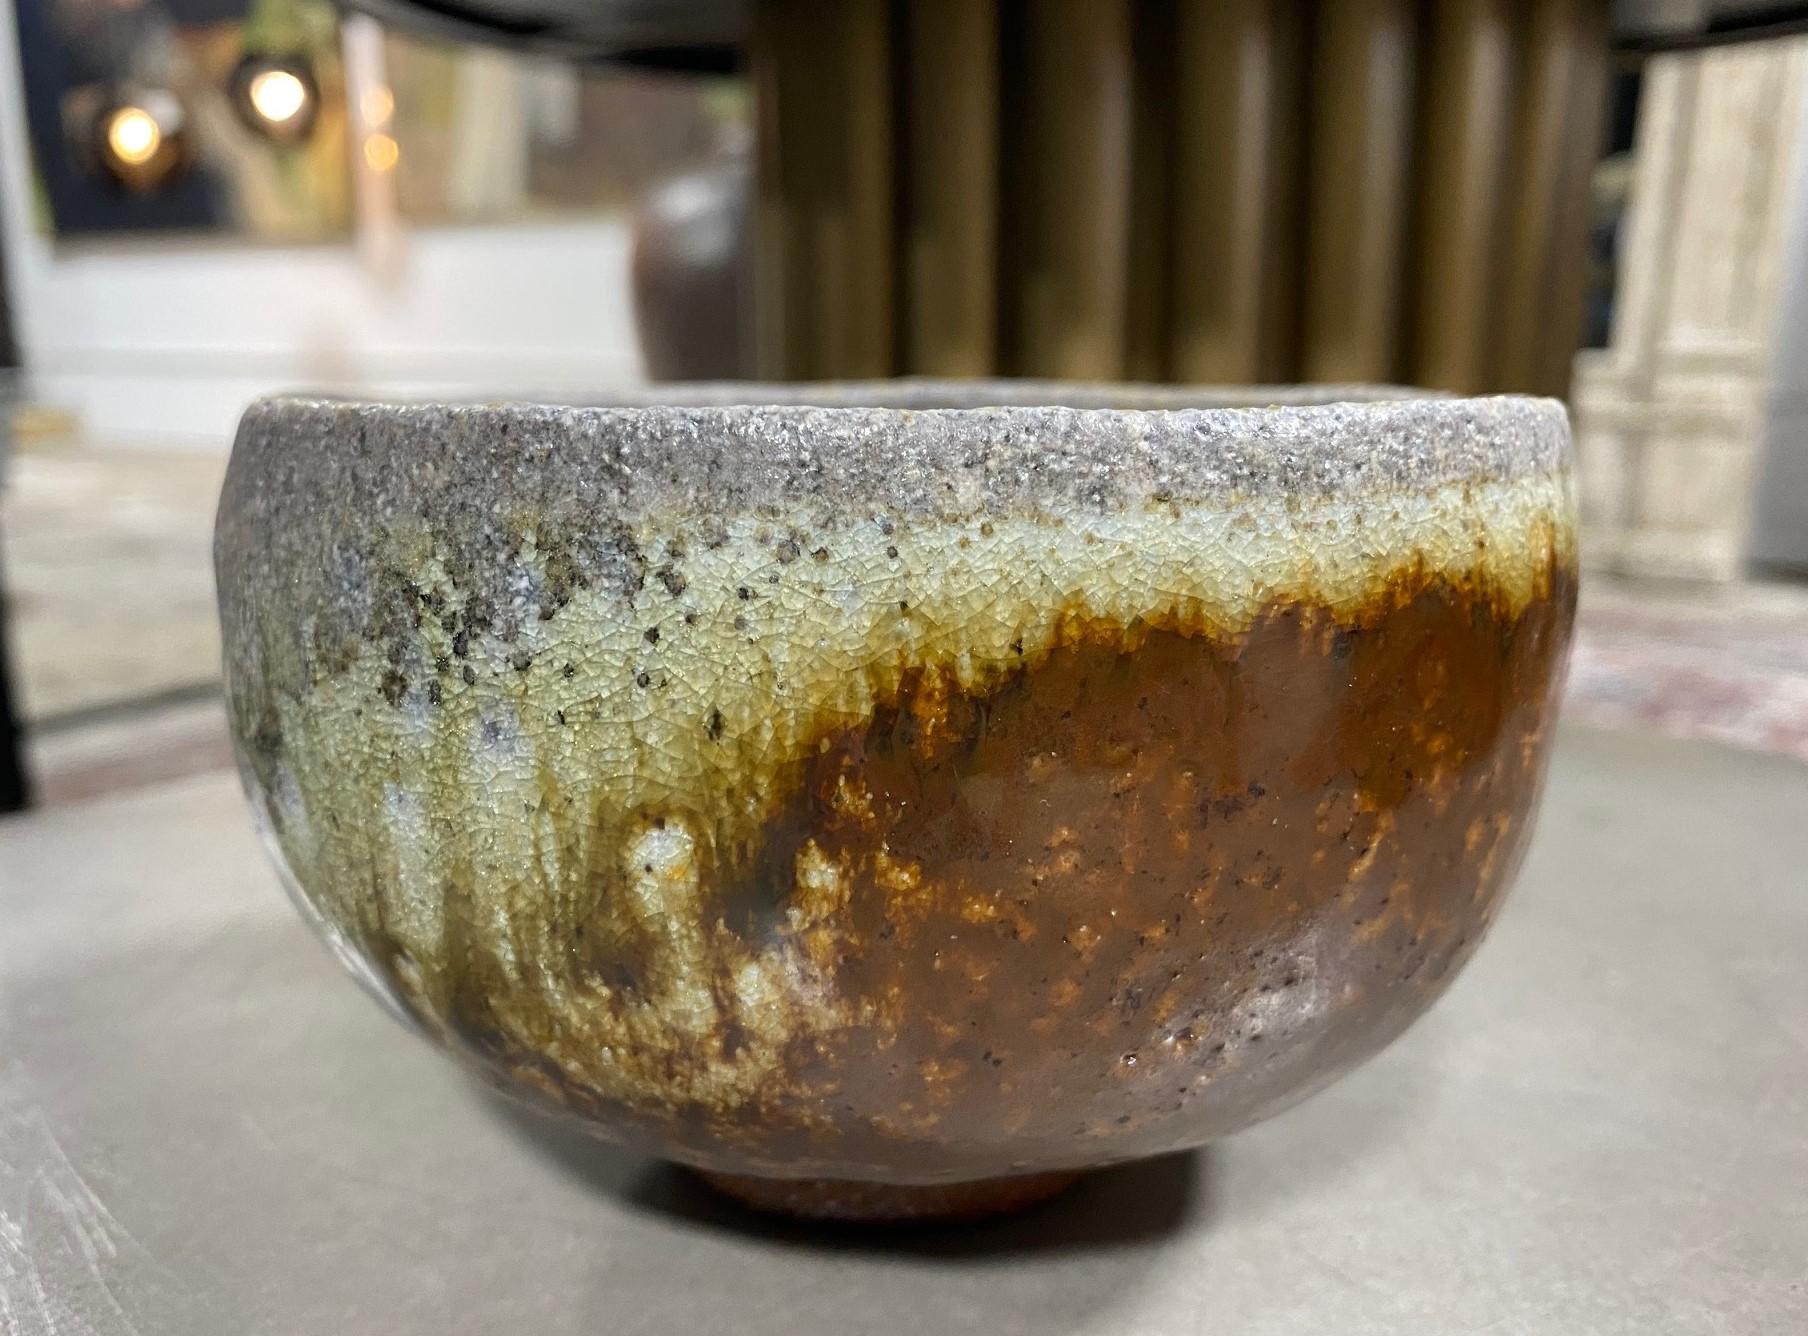 A stunning Japanese stoneware studio pottery chawan tea bowl that features a beautiful, heavy and sumptuously multi-glaze with wonderful shifts in color and texture. This bowl is without question one of our personal favorites.

This particular